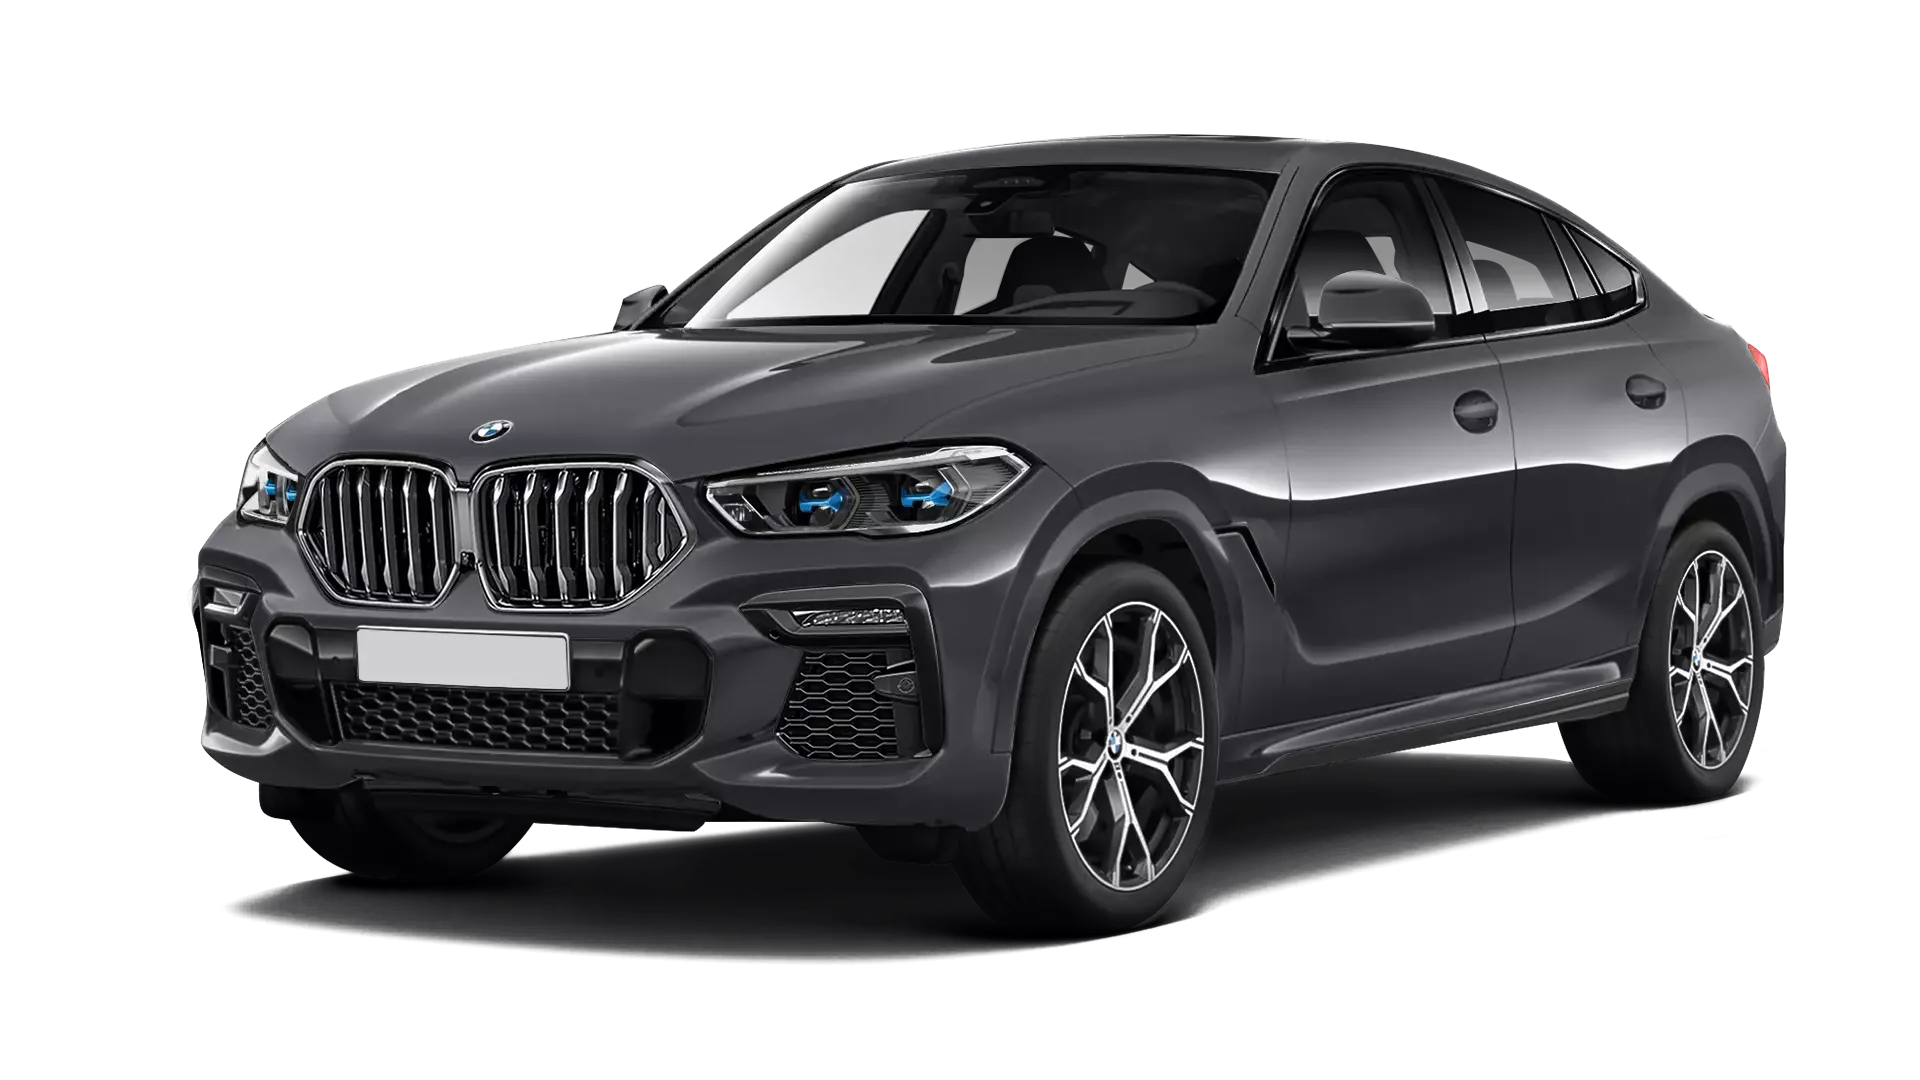 BMW X6 stock front view in arctic grey